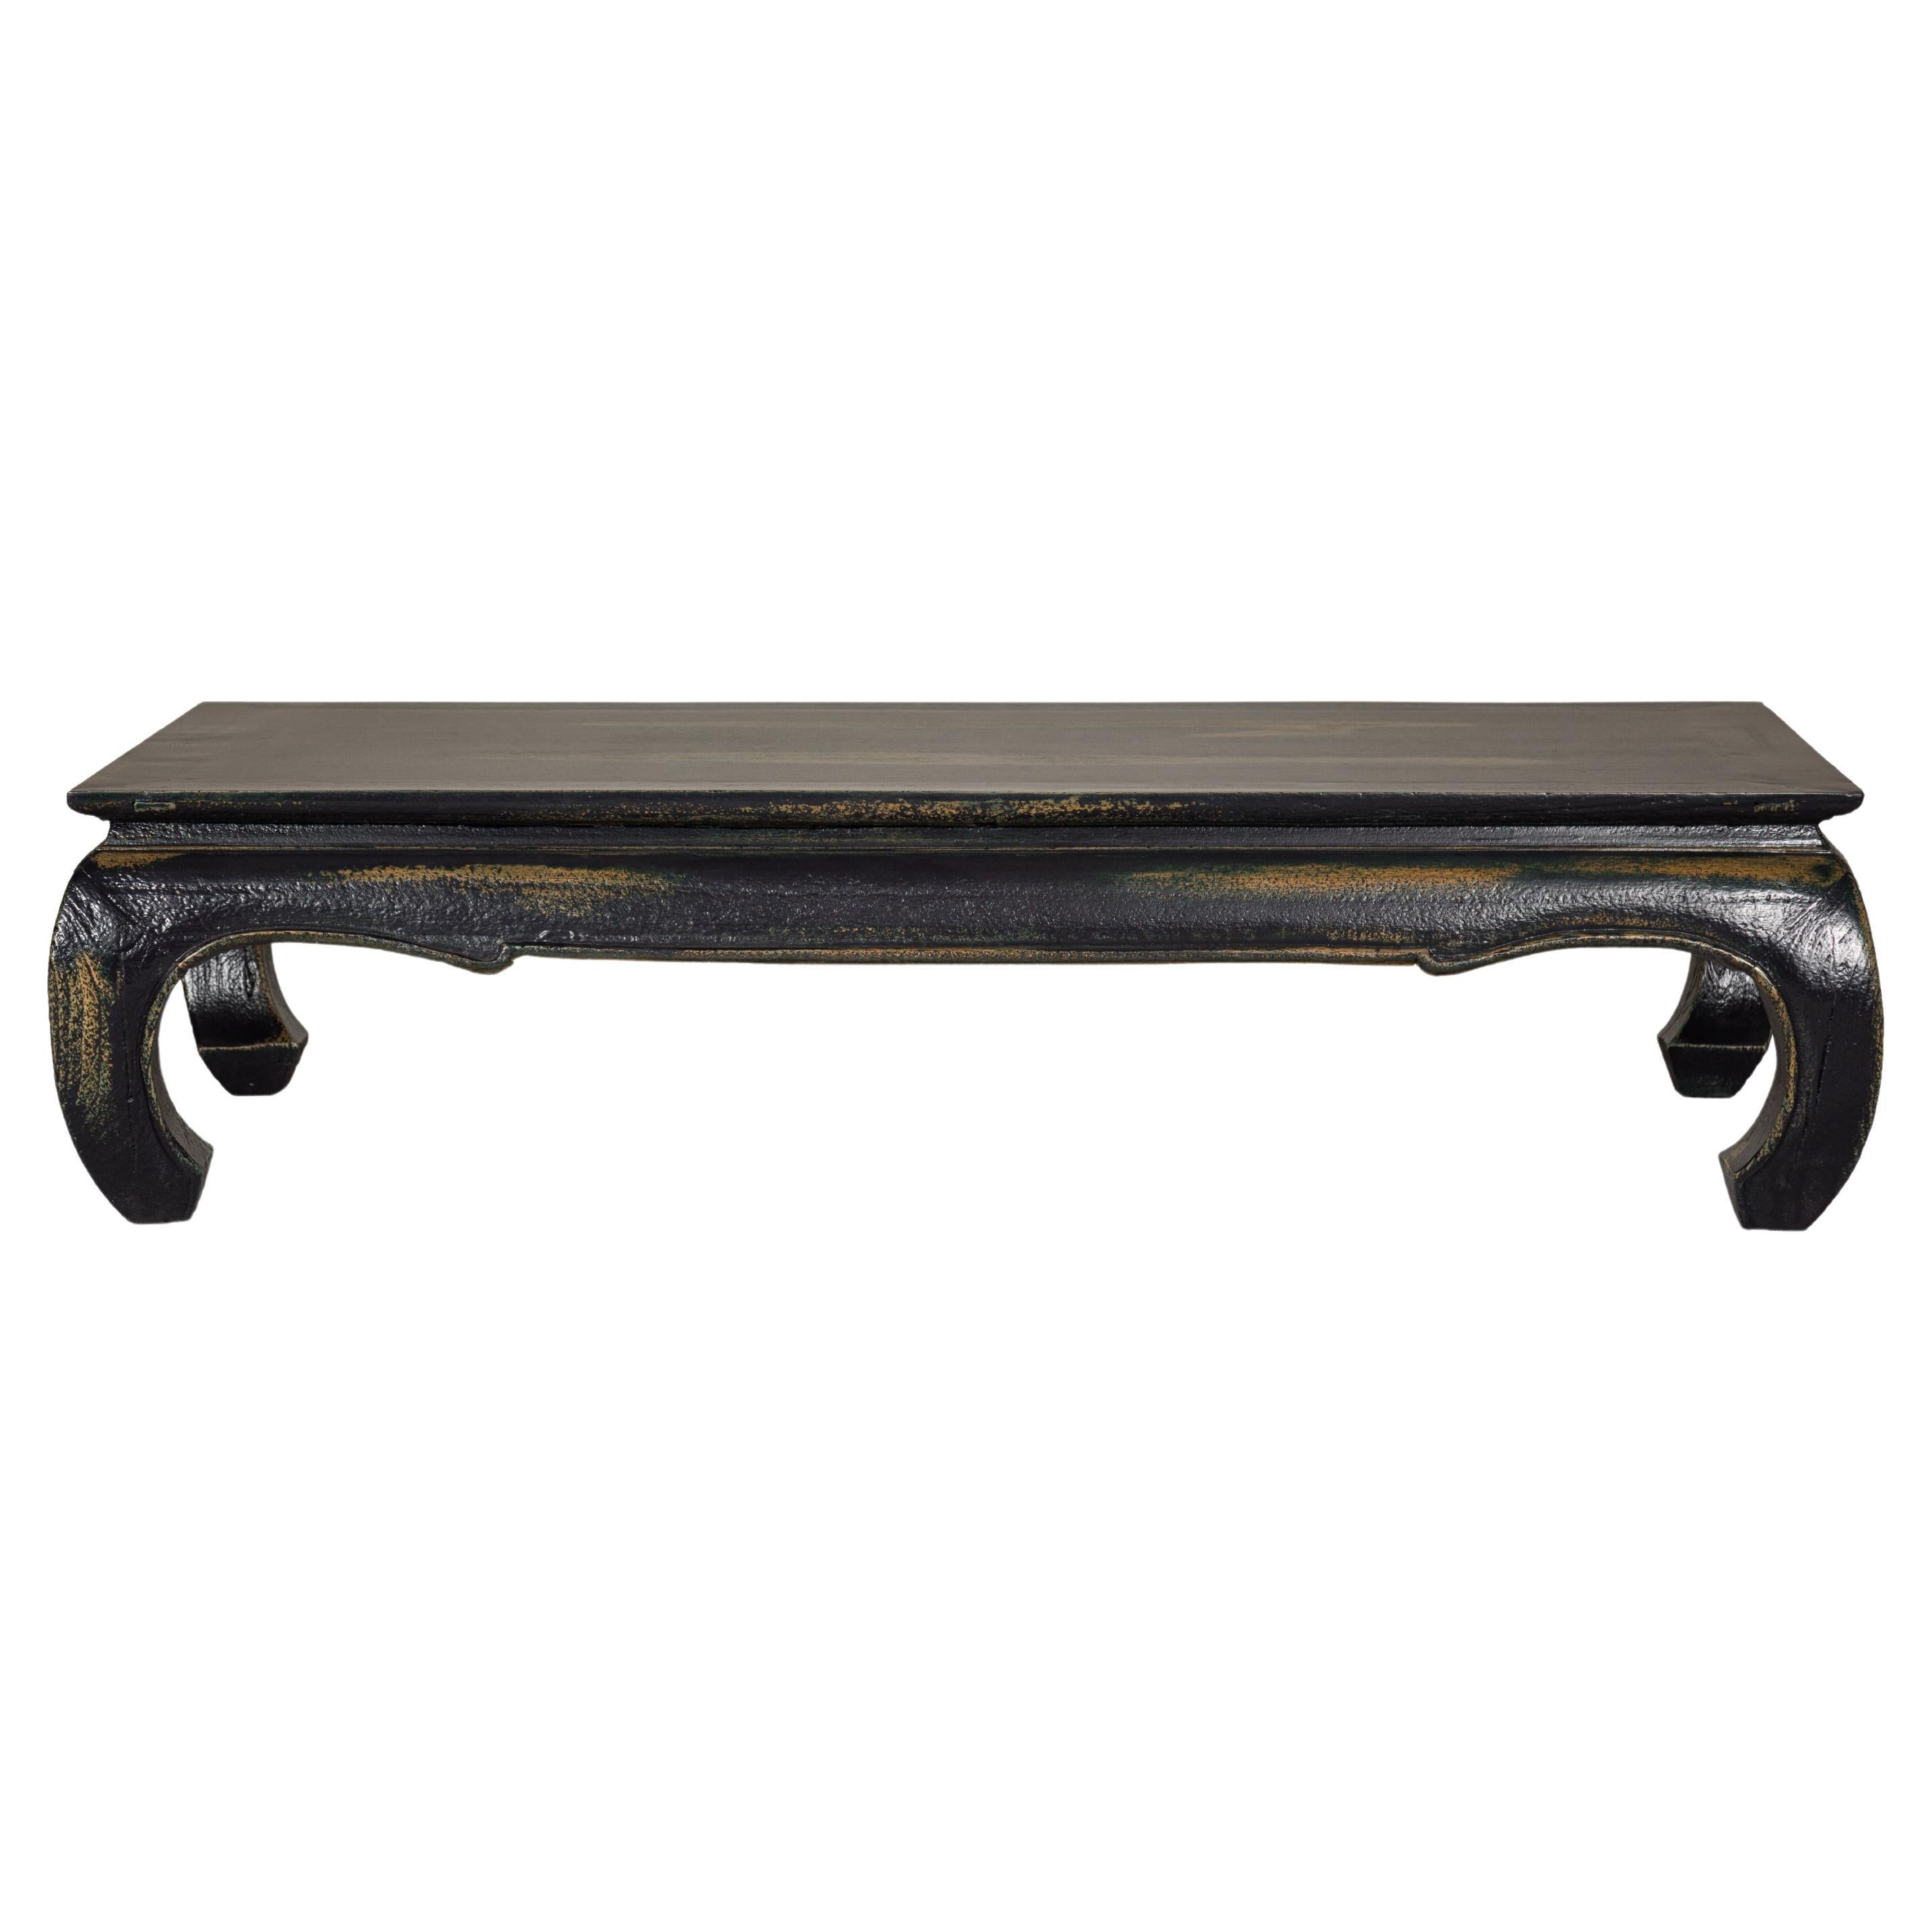 Distressed Dark Blue Chow Leg Coffee Table with Ocher Accents and Waisted Apron For Sale